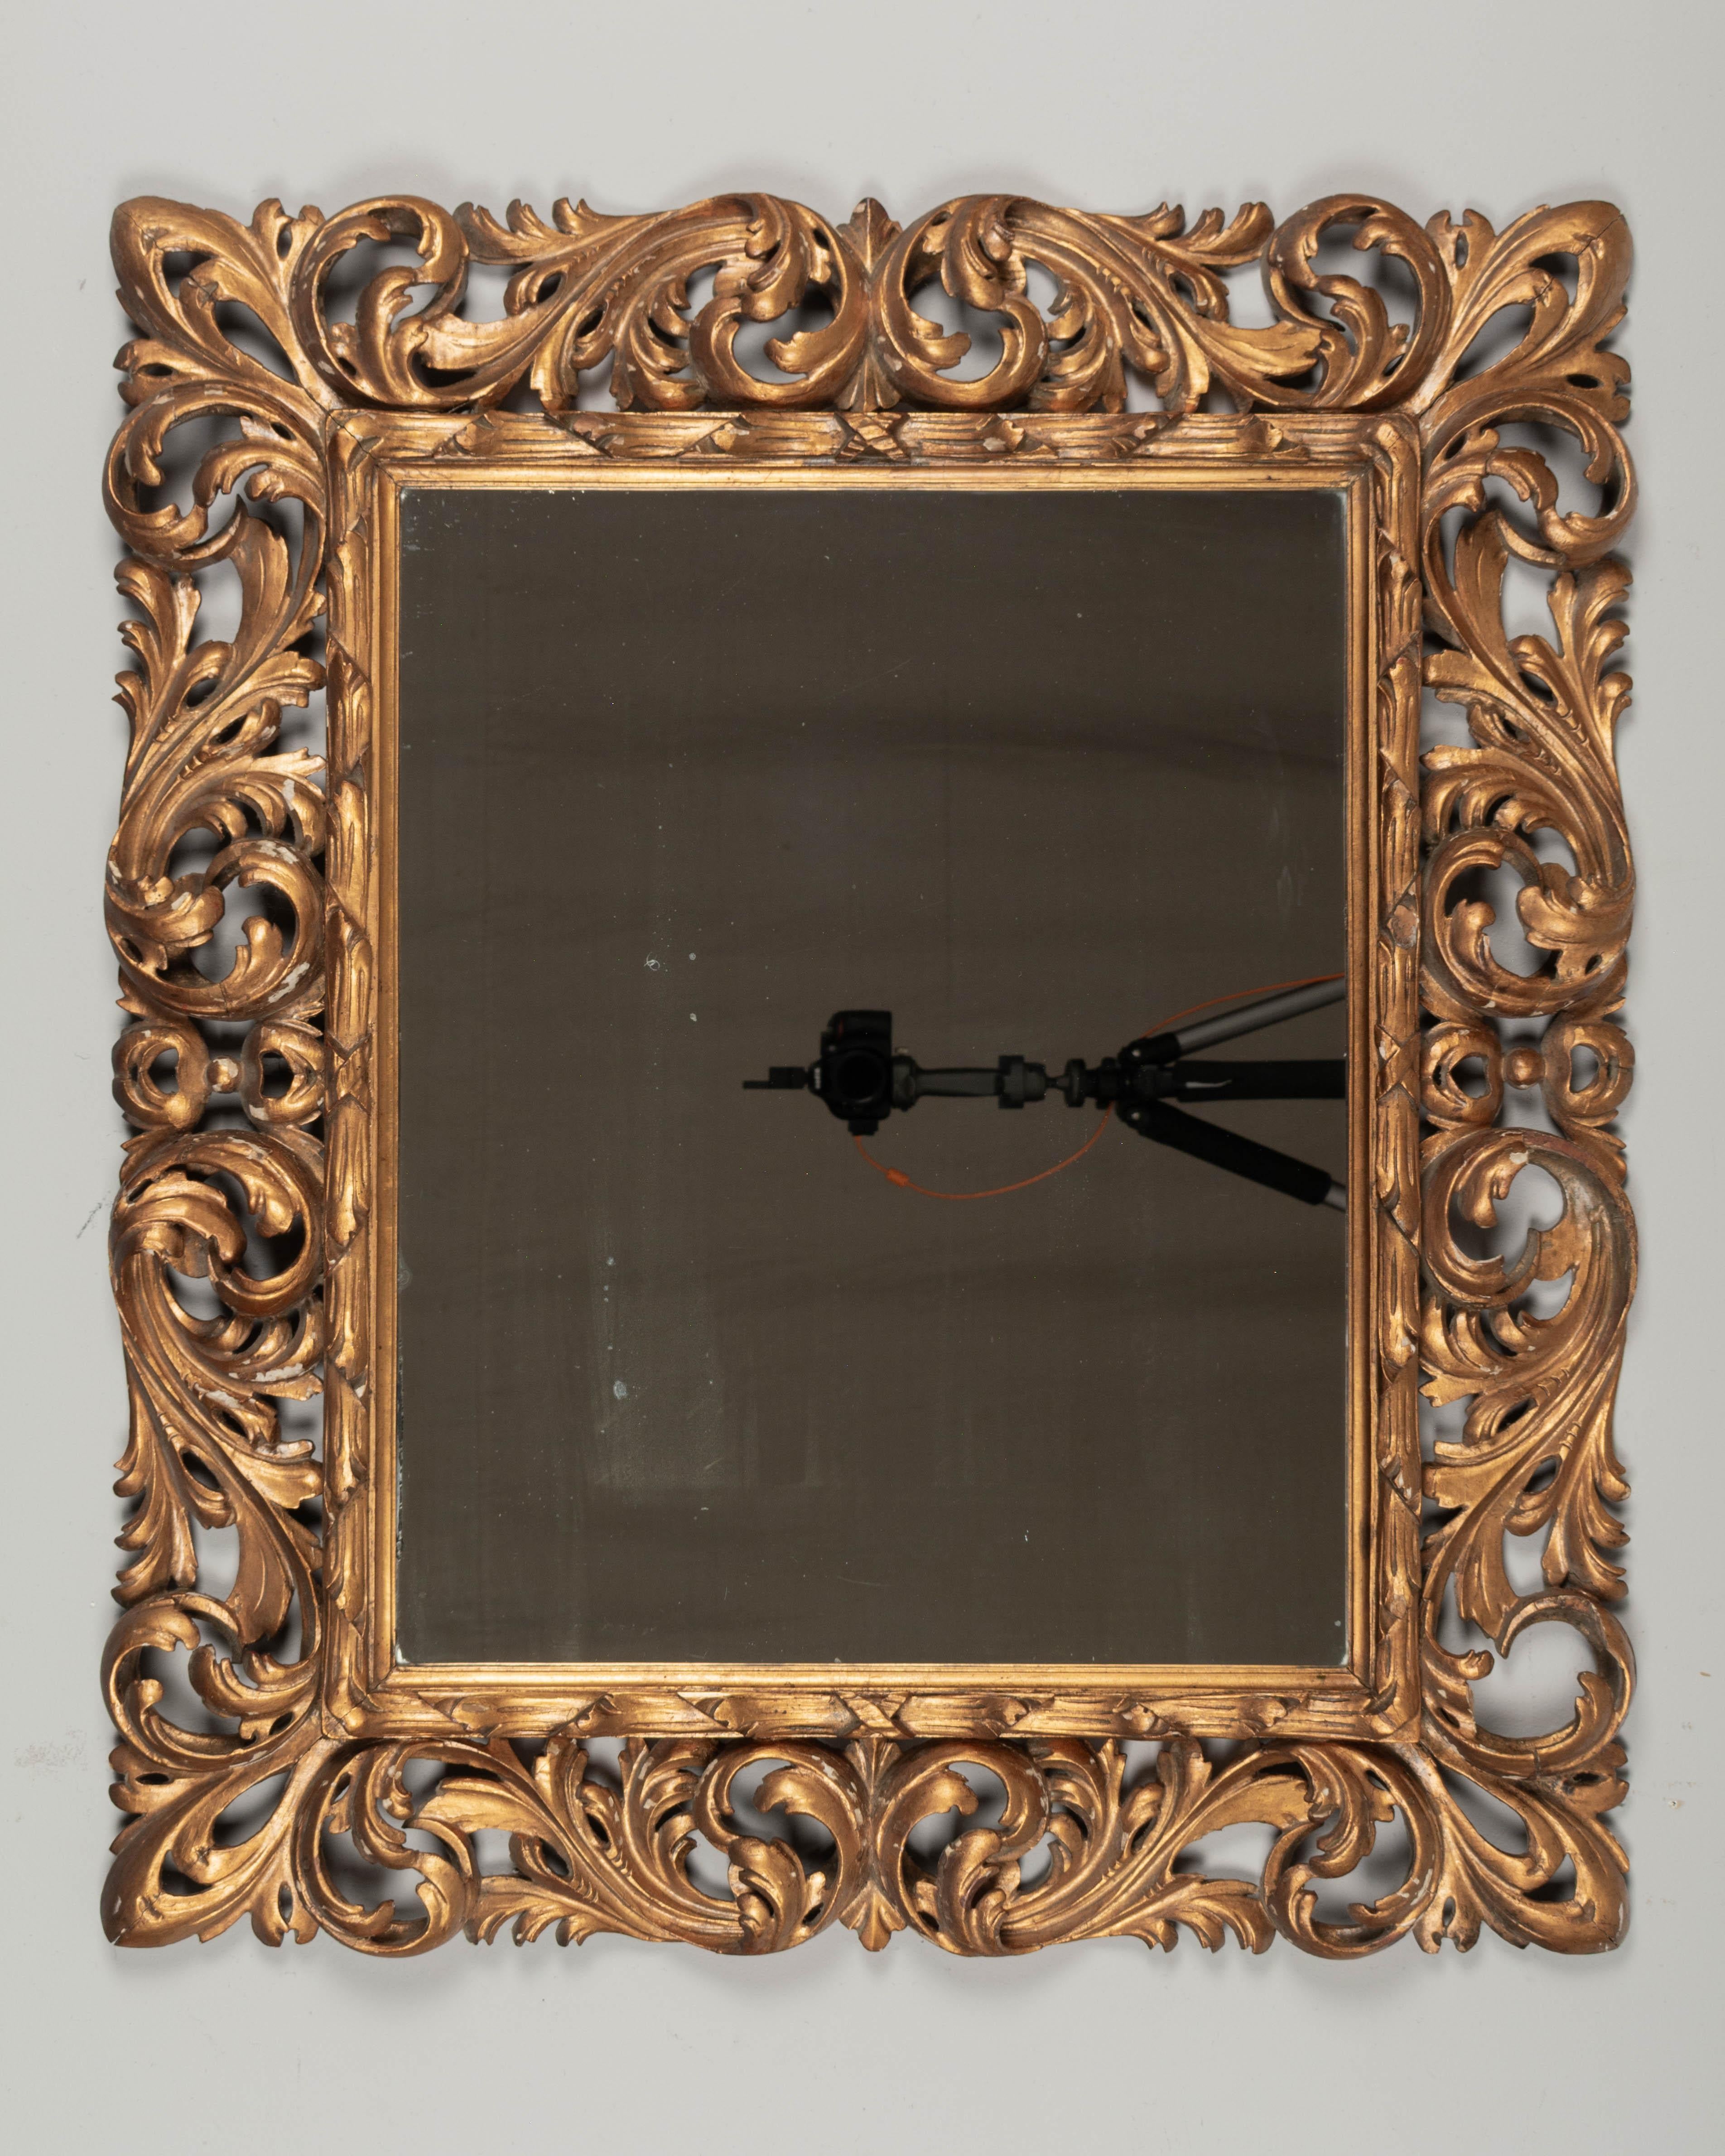 An Italian Baroque style giltwood mirror with carved scrolling acanthus leaves. Warm gilt finish with many losses to gilt and some minor losses to carving. Original mirror. Wired to hang horizontally. Circa 1920s.
Overall dimensions: 39.5